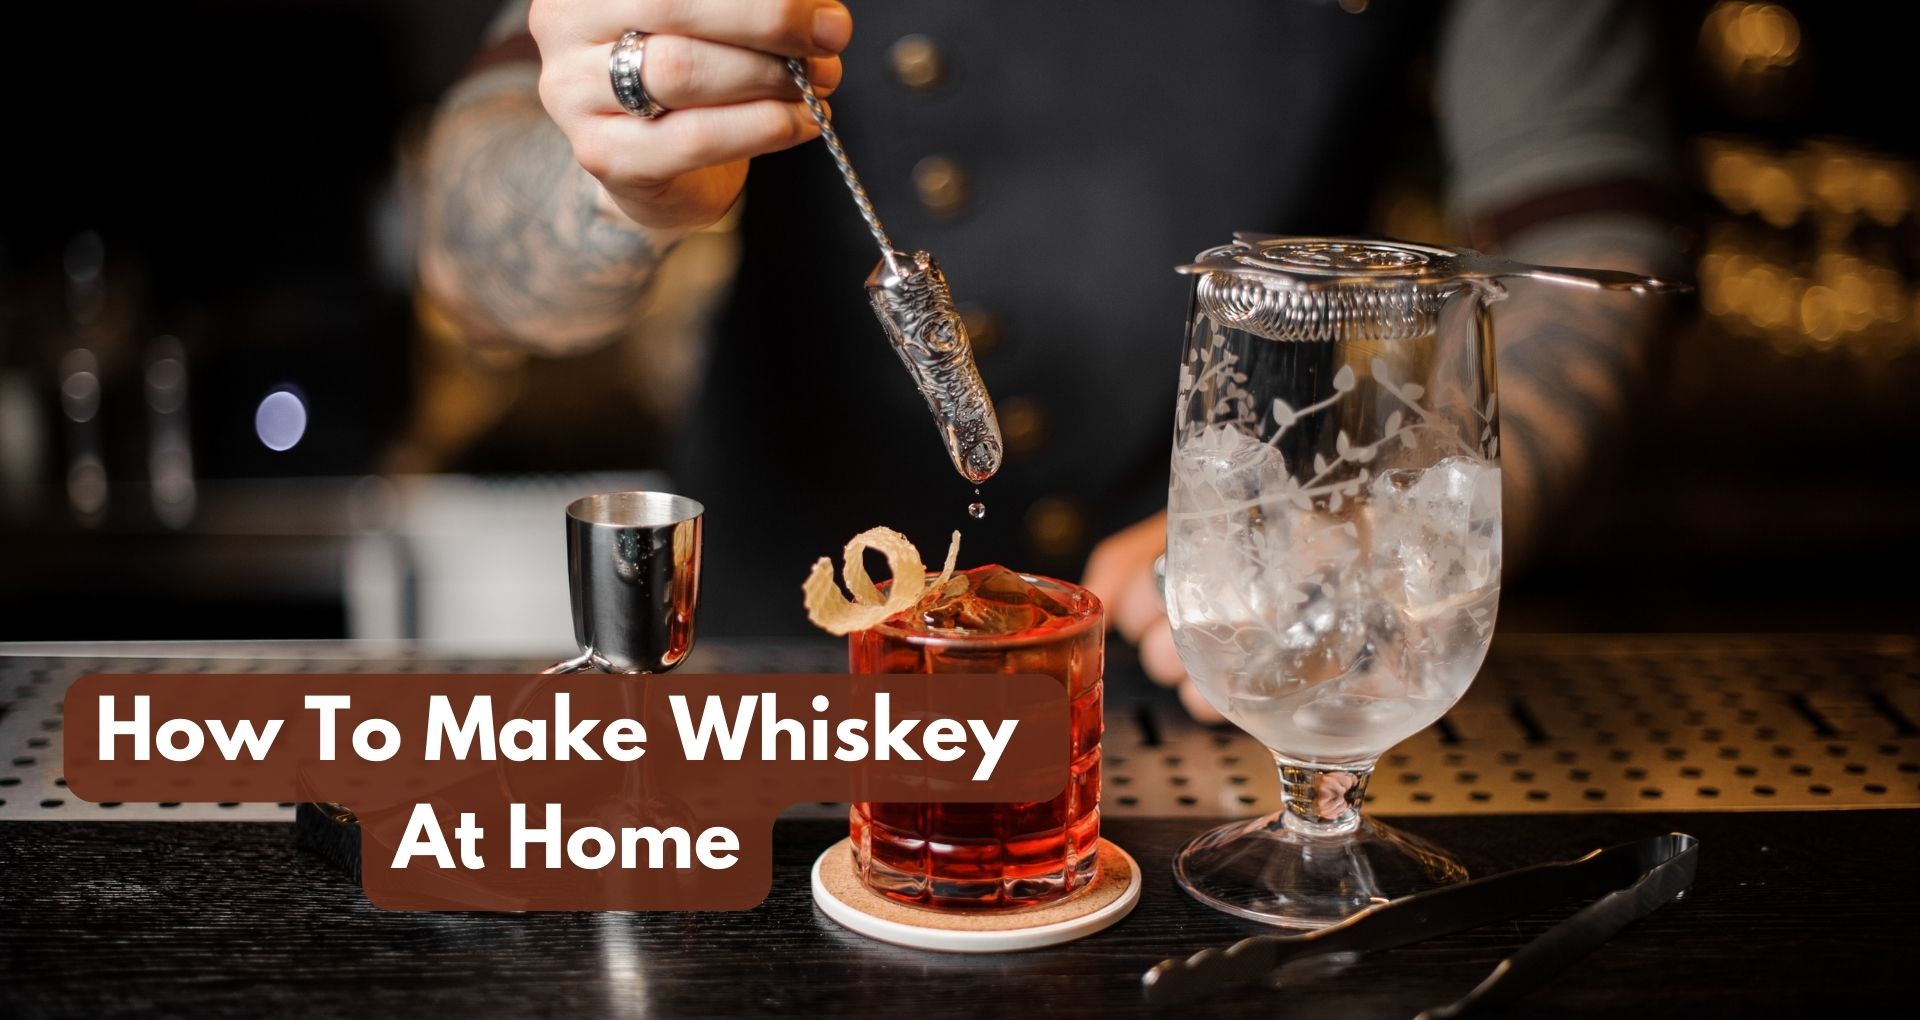 How To Make Whiskey At Home?